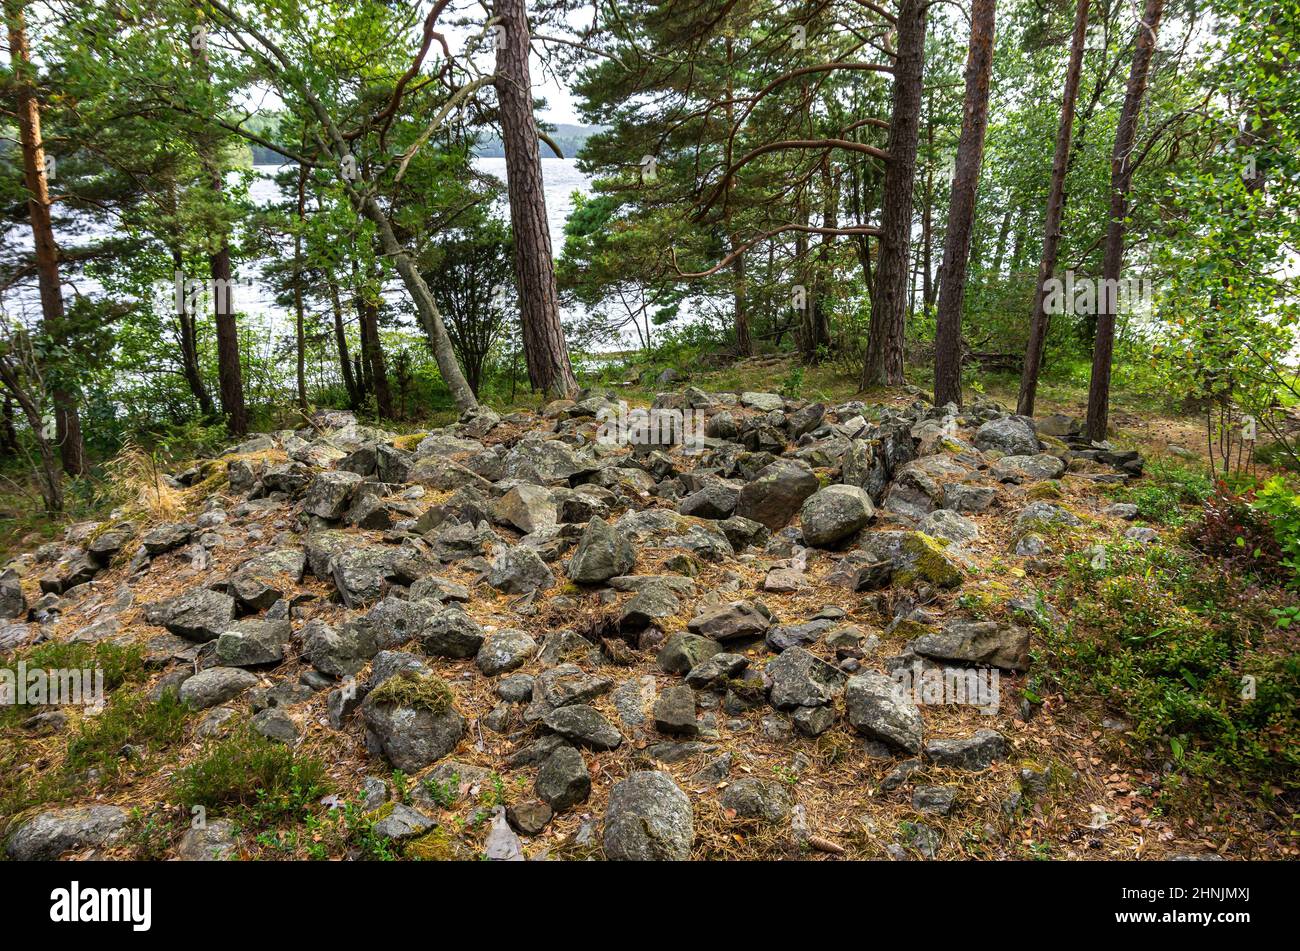 Cairn as evidence of a Bronze Age burial site in the forest area of Tisselskog Nature Reserve near Högsbyn, Dalsland, Västra Götalands län, Sweden. Stock Photo